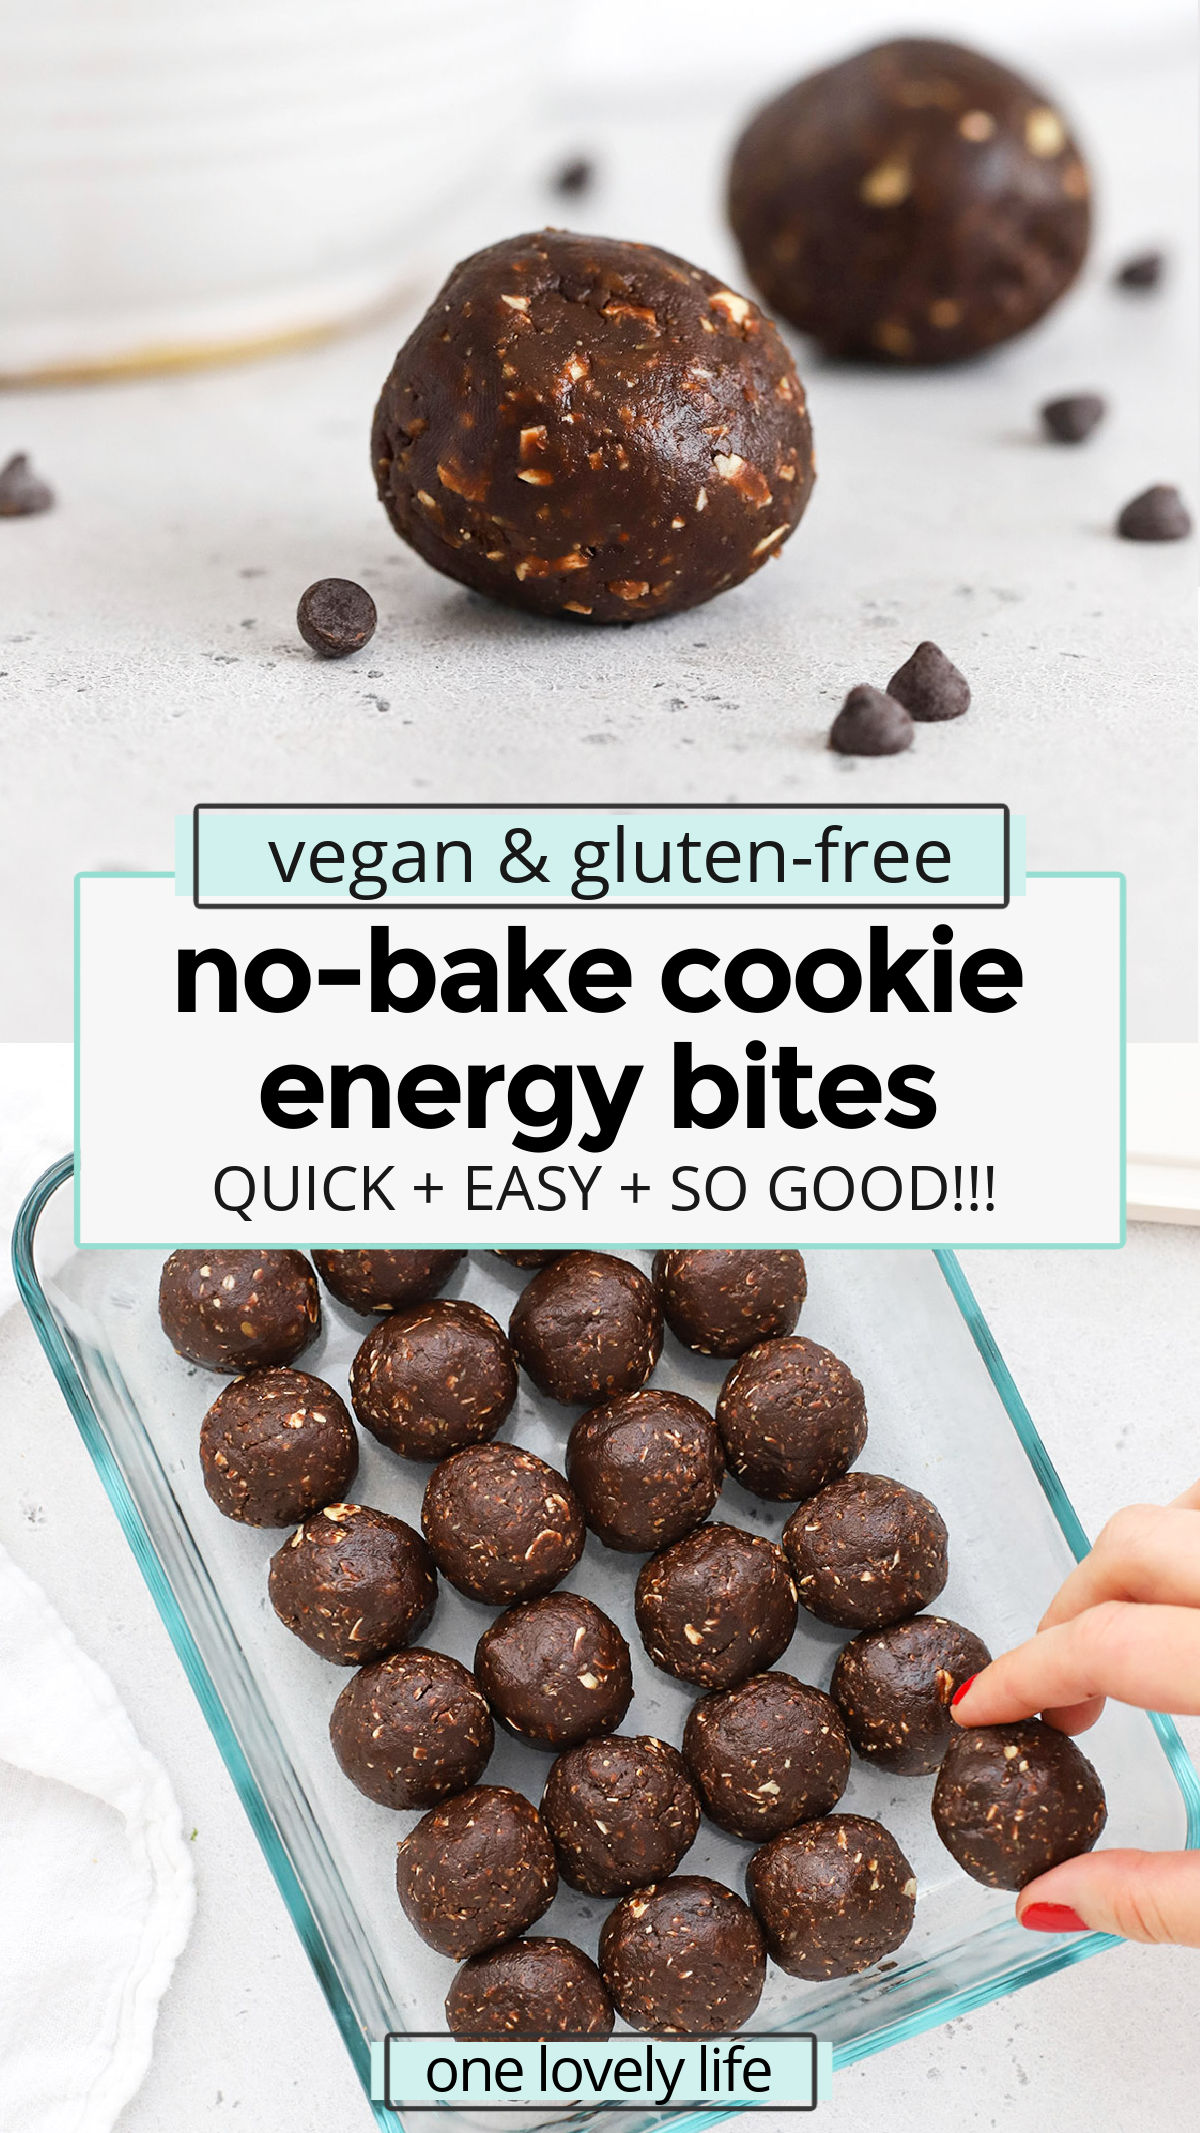 No Bake Cookie Energy Bites - The perfect snack when you're craving something sweet. These chocolate peanut butter energy bites are gluten free, vegan and taste like a cookie! // chocolate peanut butter energy balls // cookie dough energy bites // chocolate coconut energy bites // vegan energy bites // healthy snack ideas // kid friendly snack // healthy snacks for kids // meal prep snack // meal prep treat // healthy treat // healthy dessert